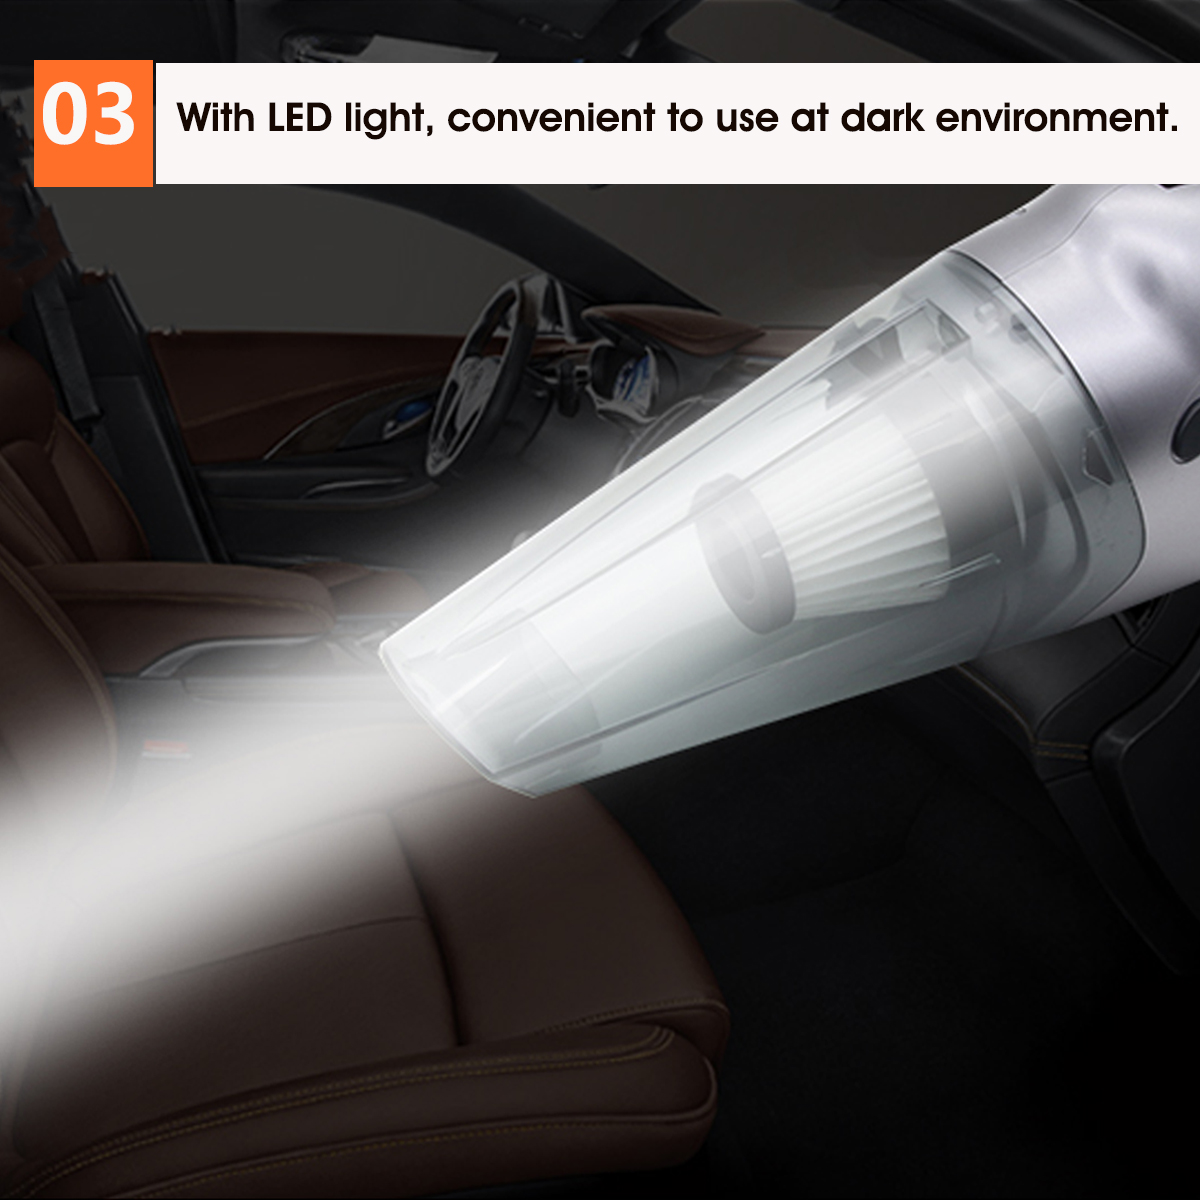 120W-Portable-Auto-Car-Handheld-Vacuum-Cleaner-Duster-Wet--Dry-Dirt-Suction-with-LED-Light-1624459-4